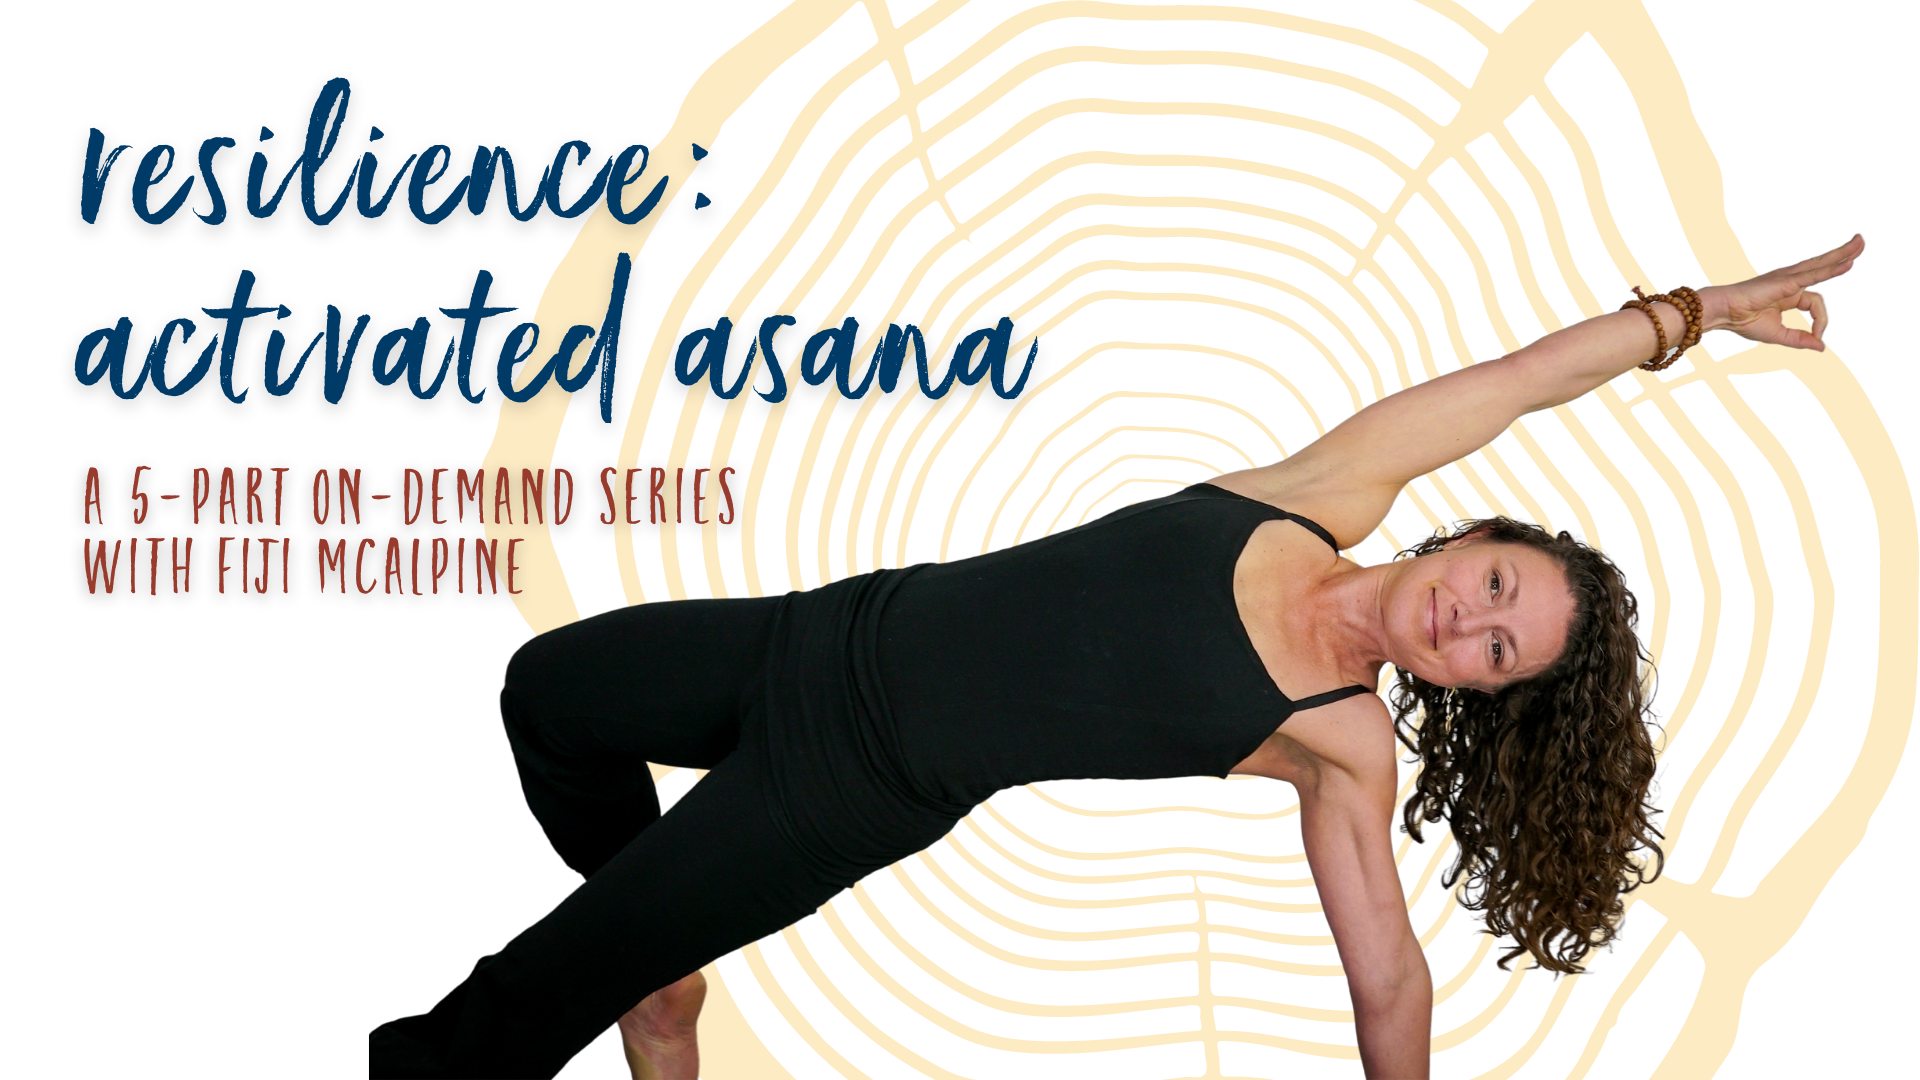 Resilience - Activated Asana